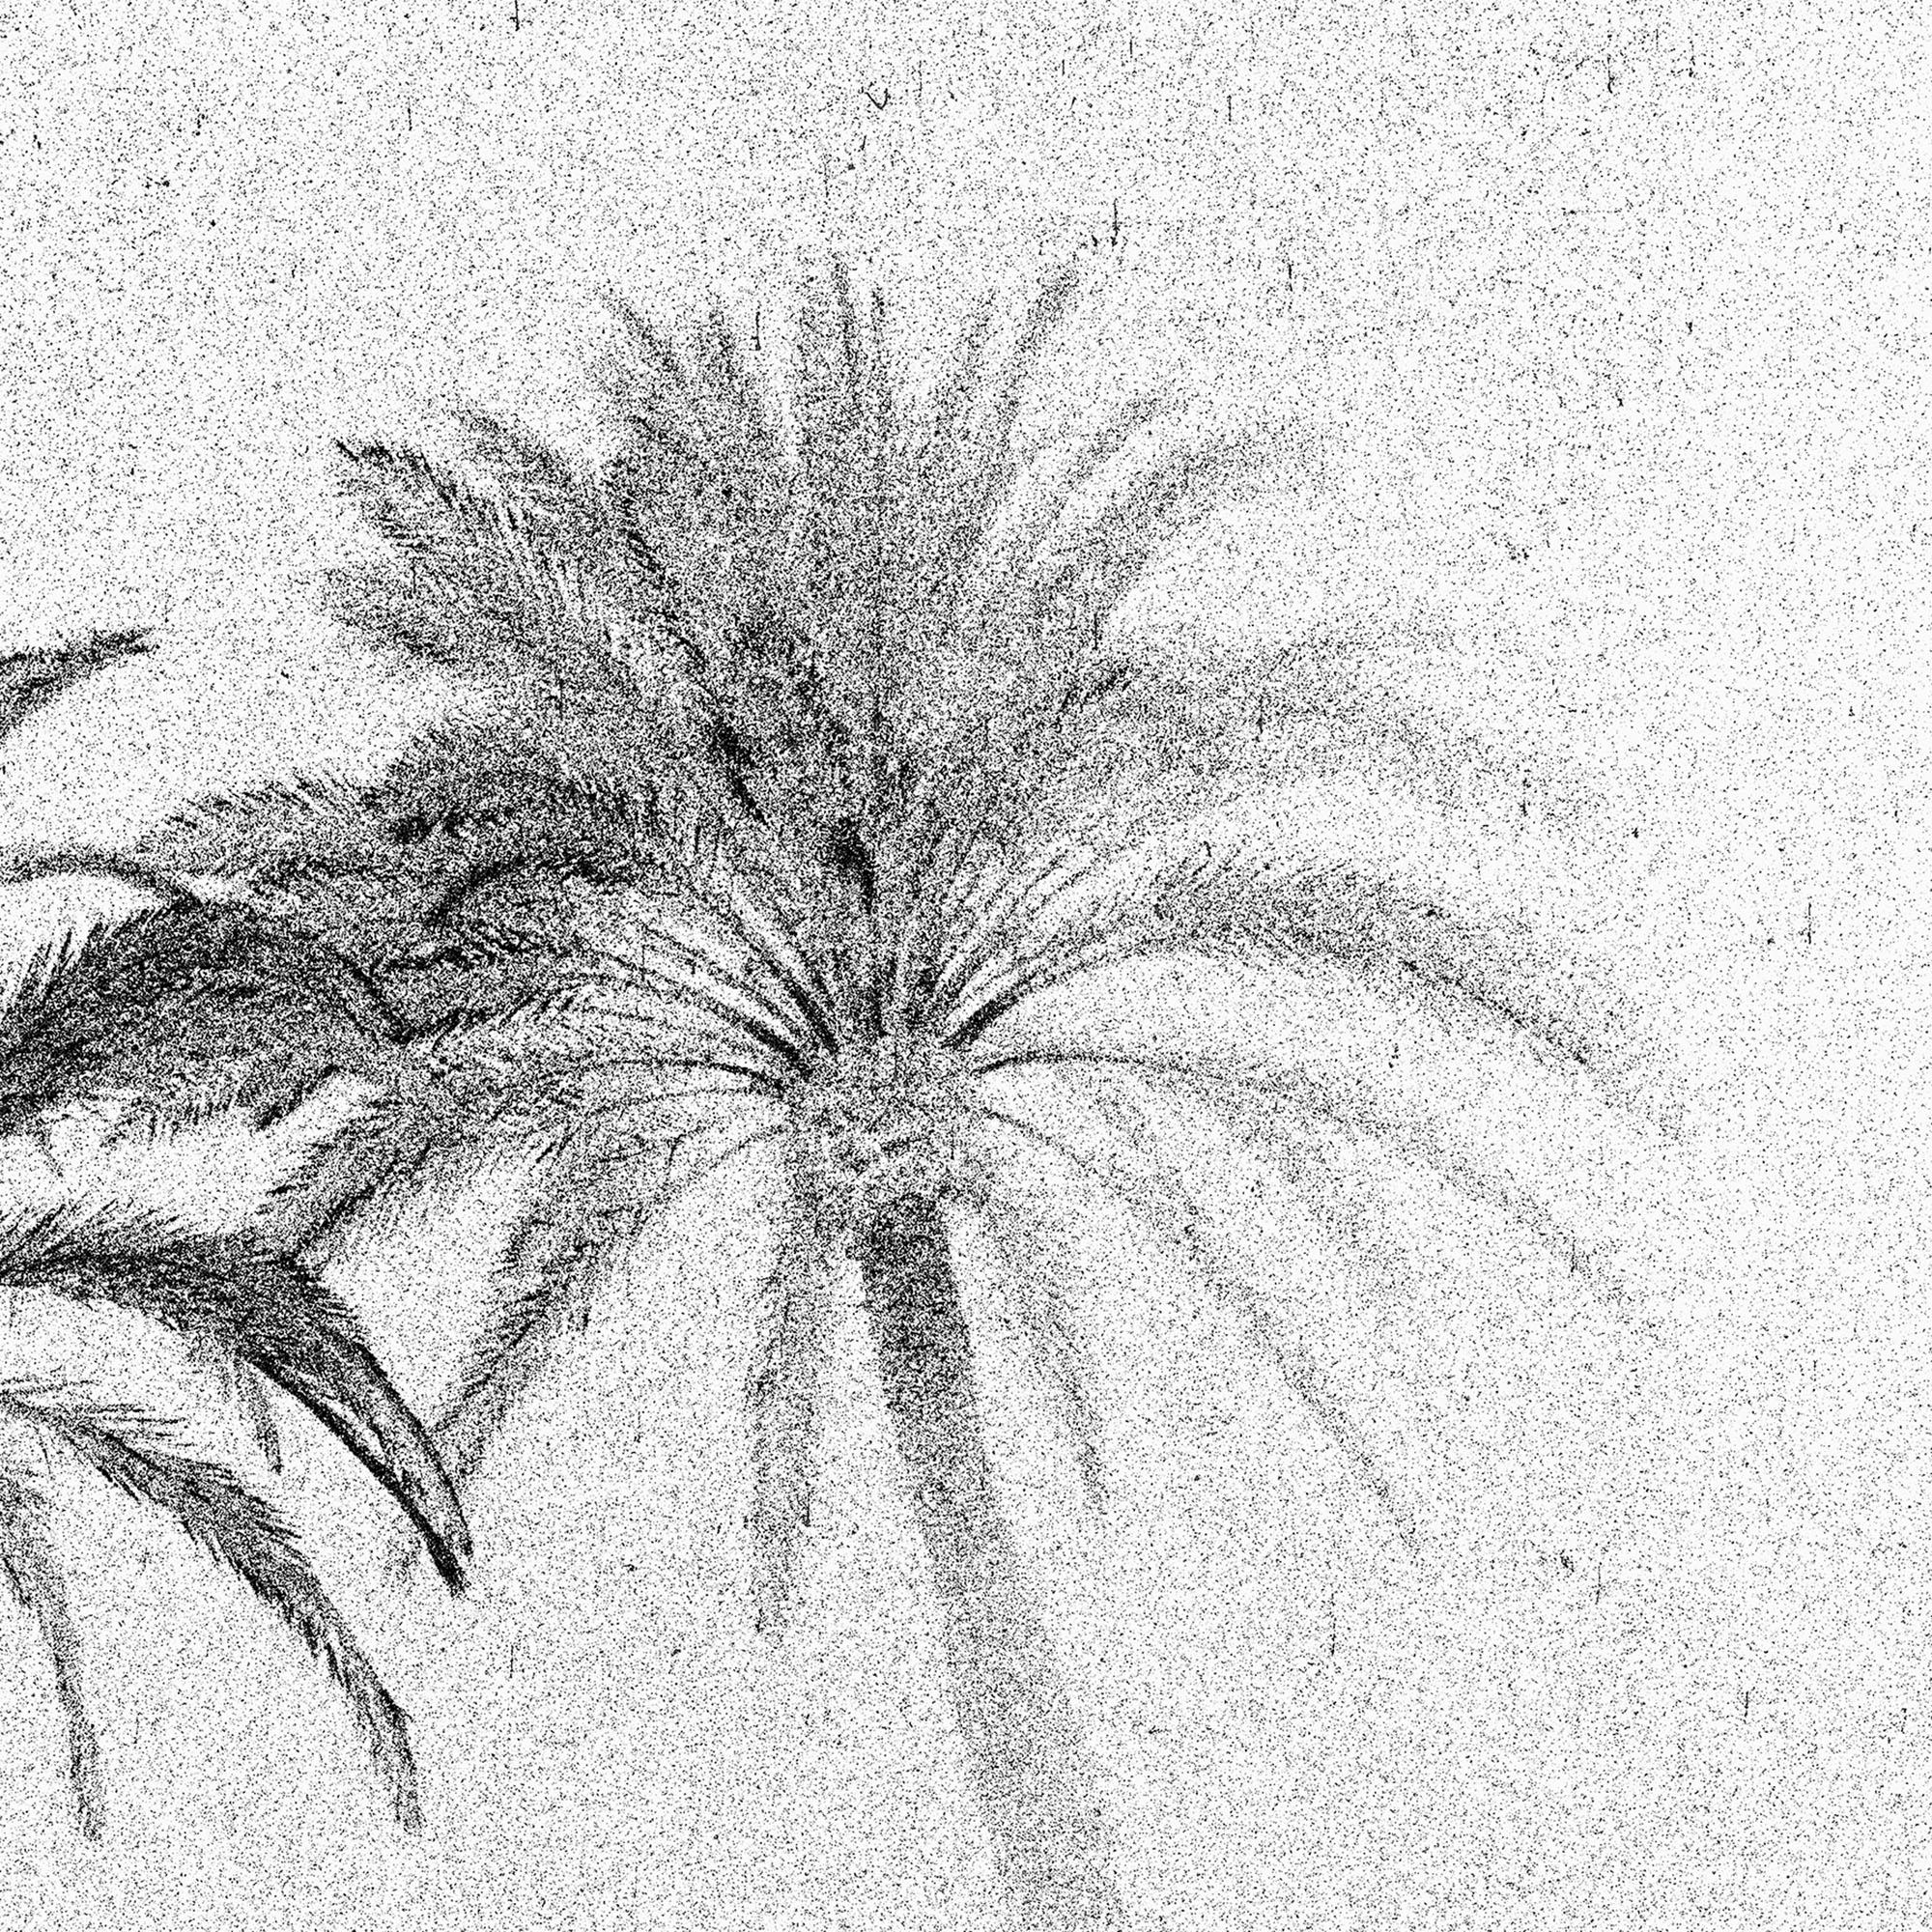 Evening Palms, Summer Showers, Barcelona - black and white photo, palms trees - Contemporary Photograph by Osheen Harruthoonyan